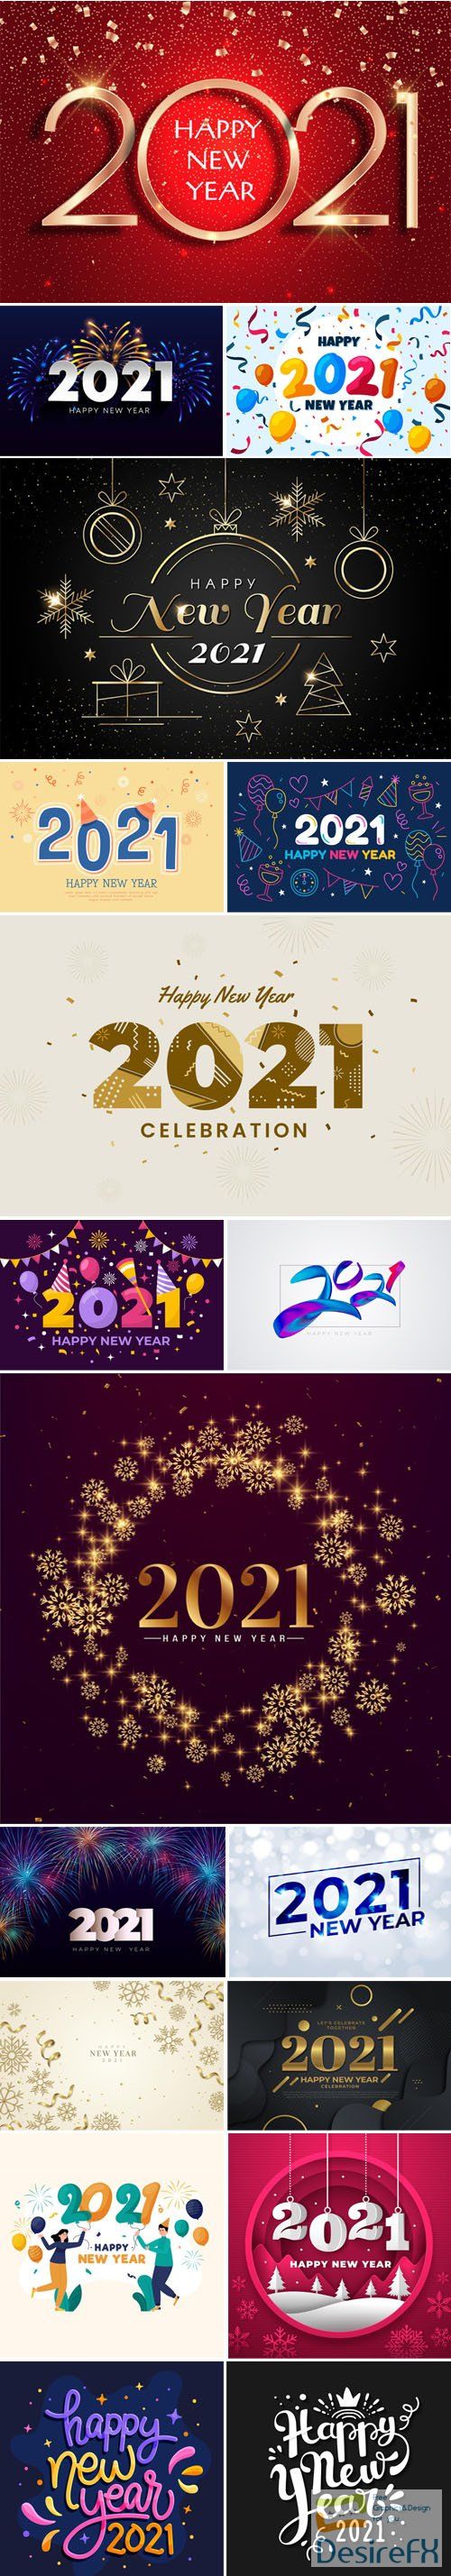 18 Happy New Year 2021 Backgrounds &amp; Lettering Vector Collection